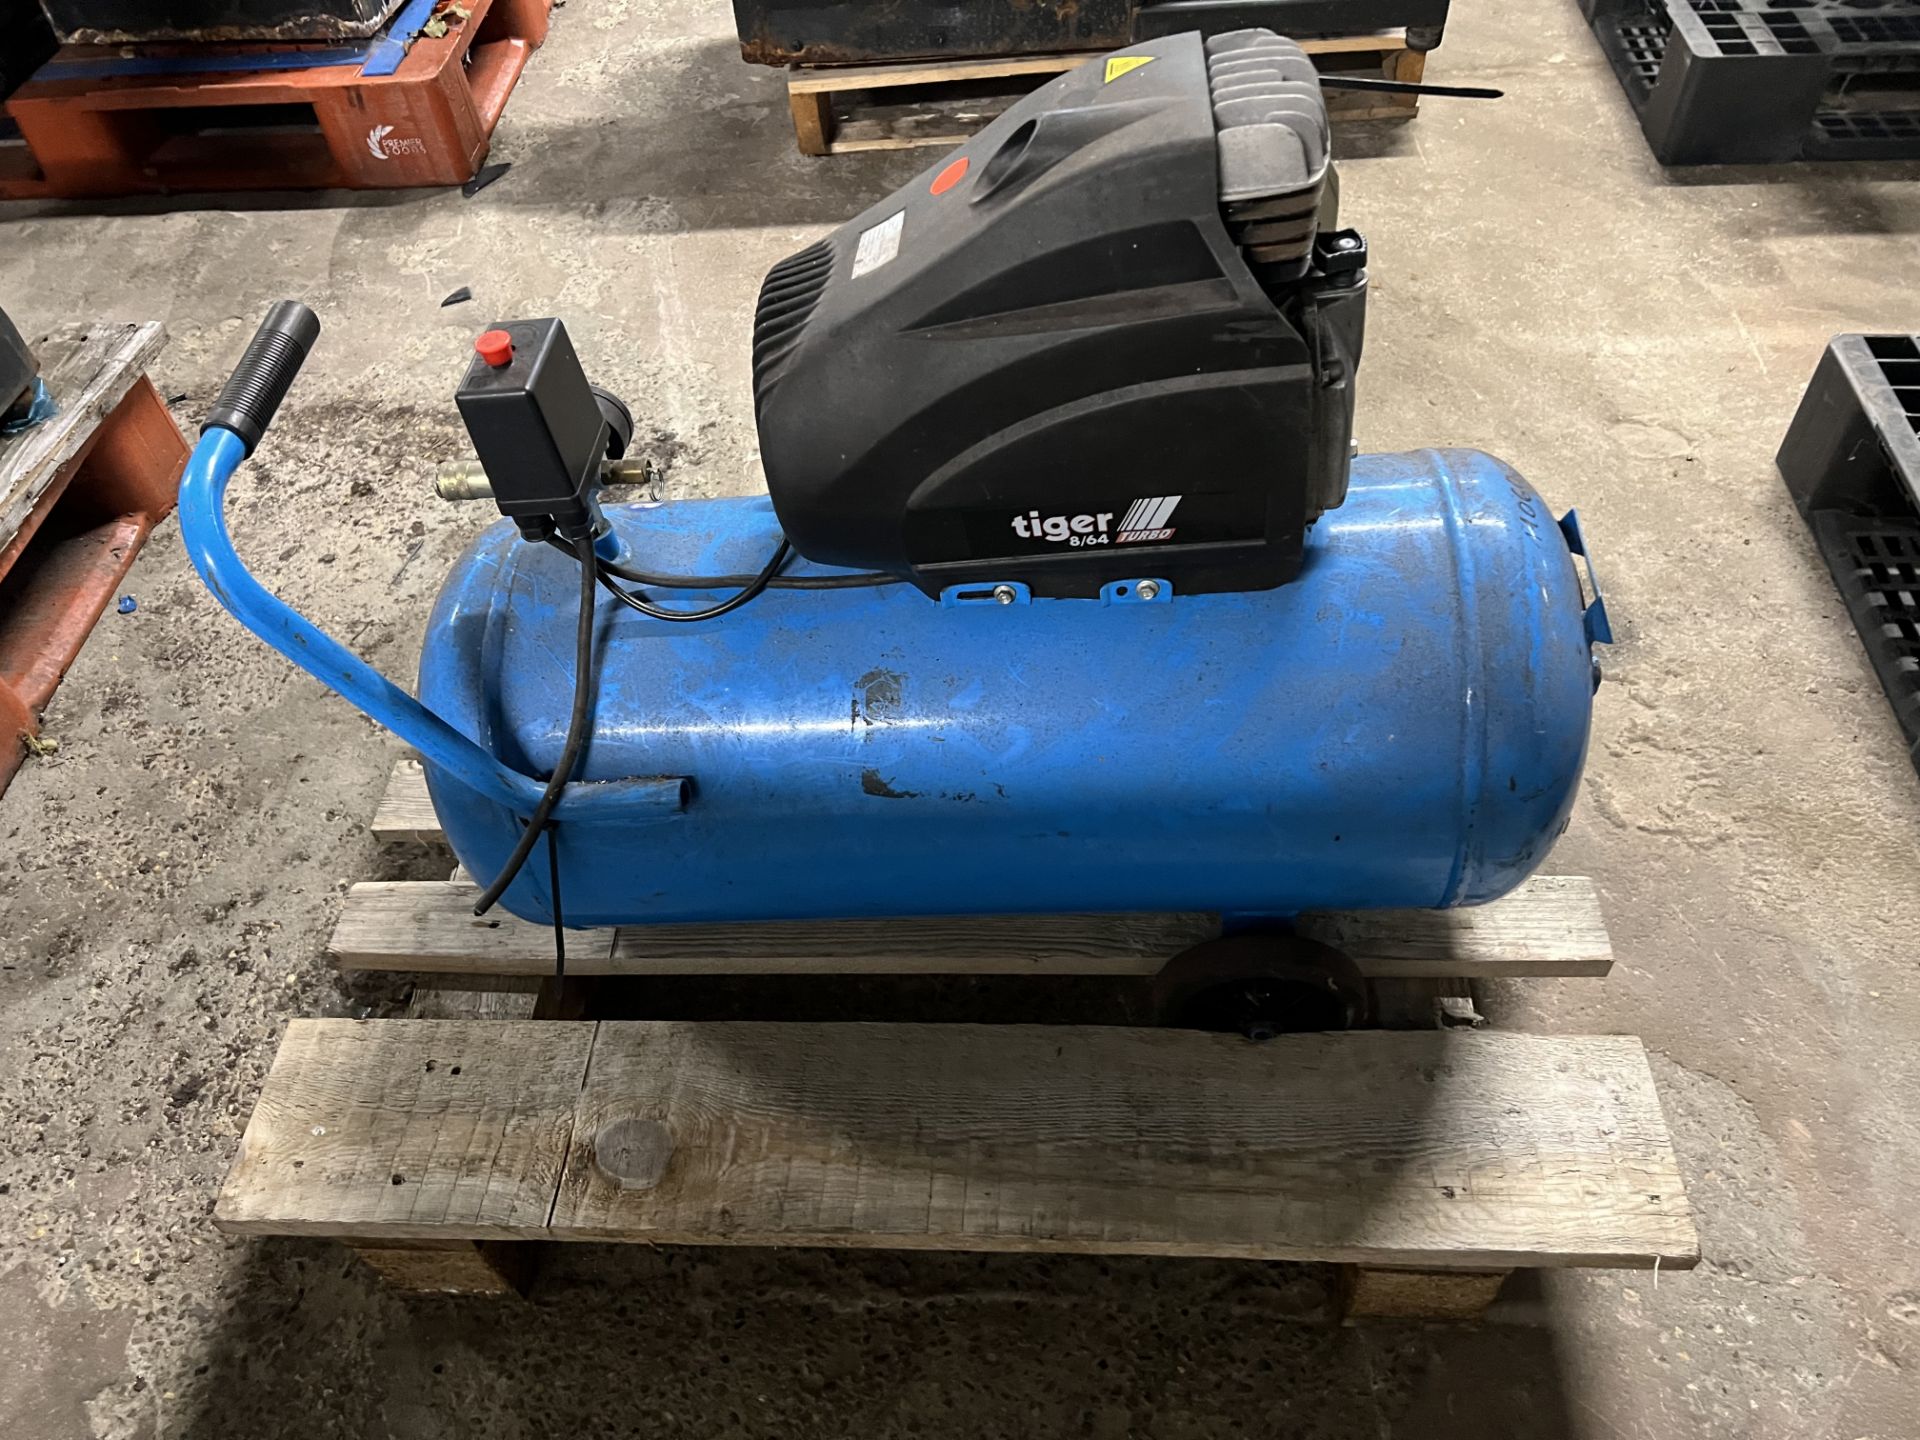 Airmaster Tiger 8/64 Turbo Compressor, lift out charge - £20 + VAT, lot located in Bury St - Bild 3 aus 3